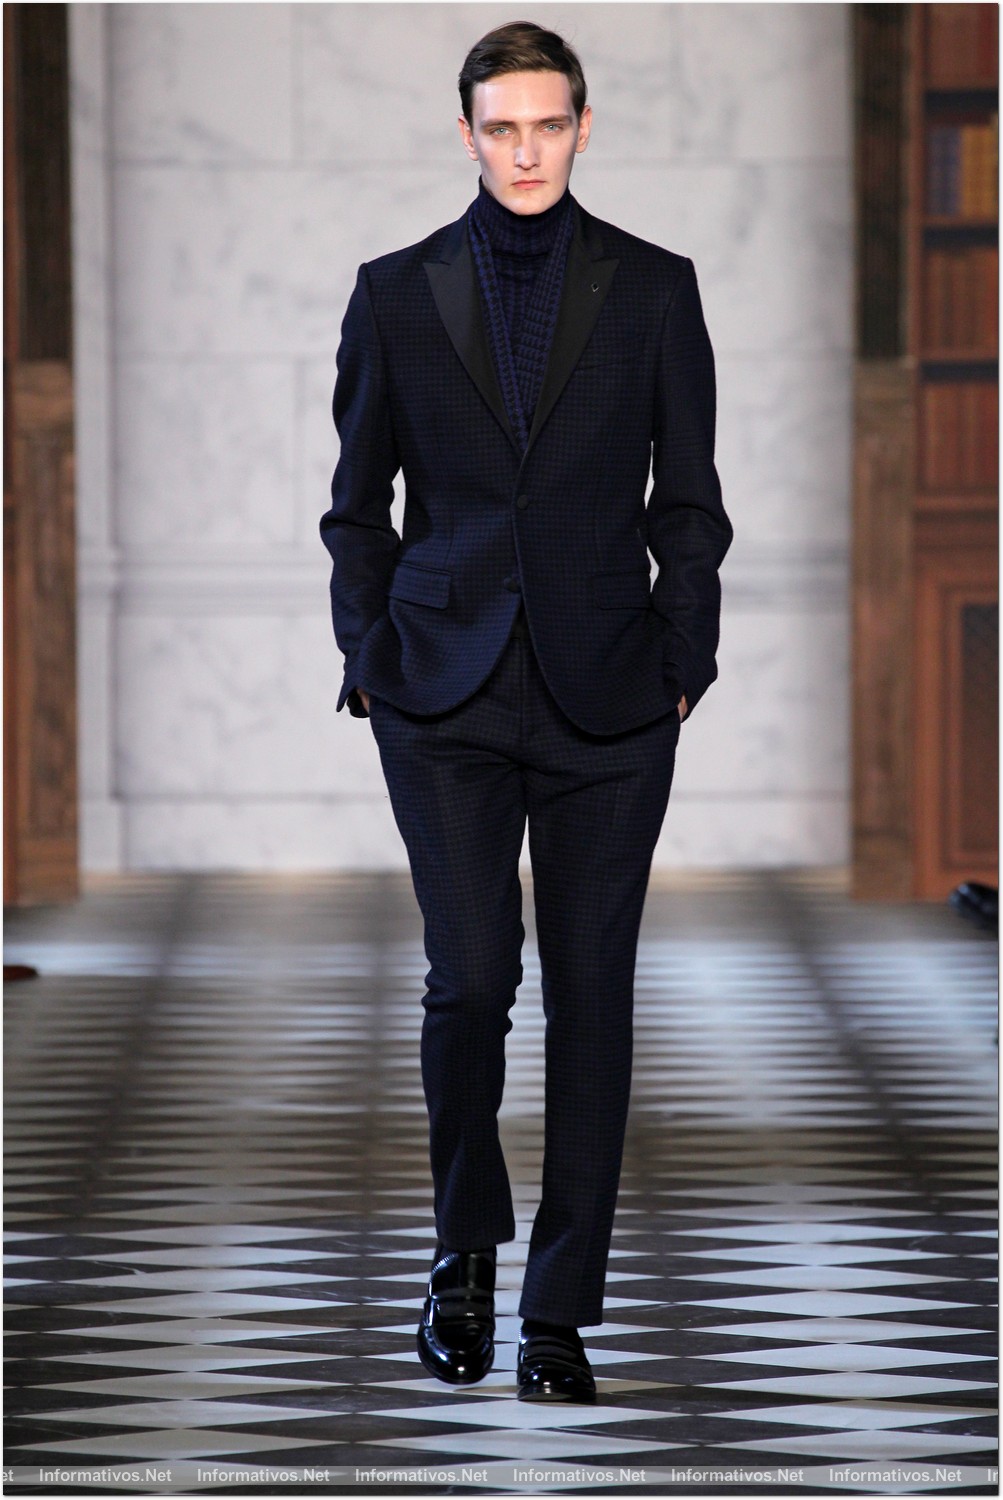 NY08FEB013.- Desfile Tommy Hilfiger Fall 2013 Men's Collection. 36. YANNICK